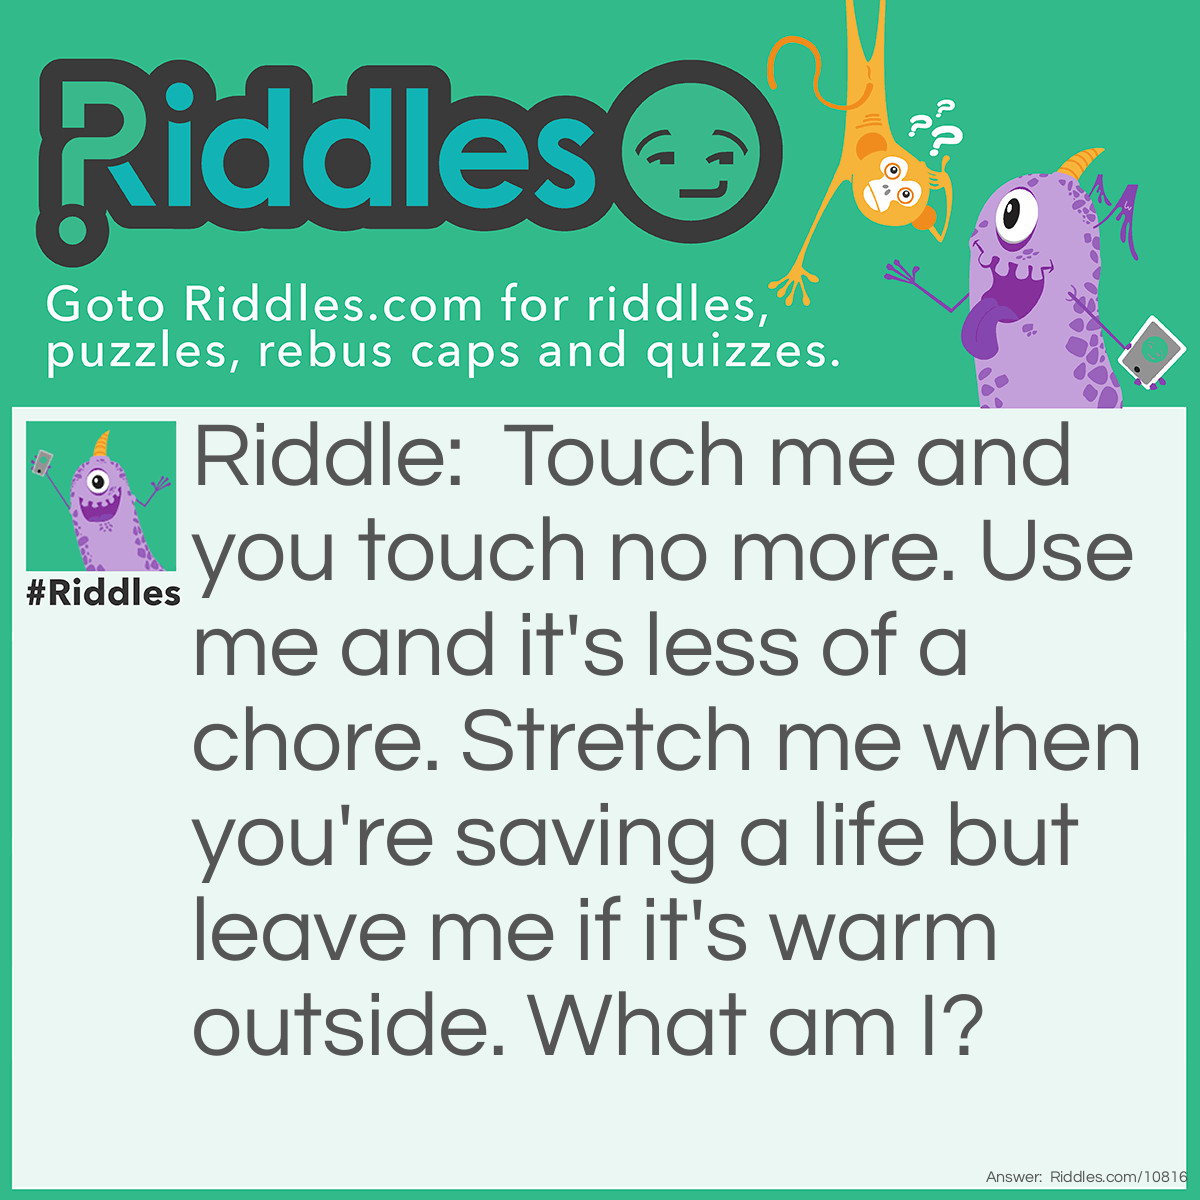 Riddle: Touch me and you touch no more. Use me and it's less of a chore. Stretch me when you're saving a life but leave me if it's warm outside. What am I? Answer: A glove.